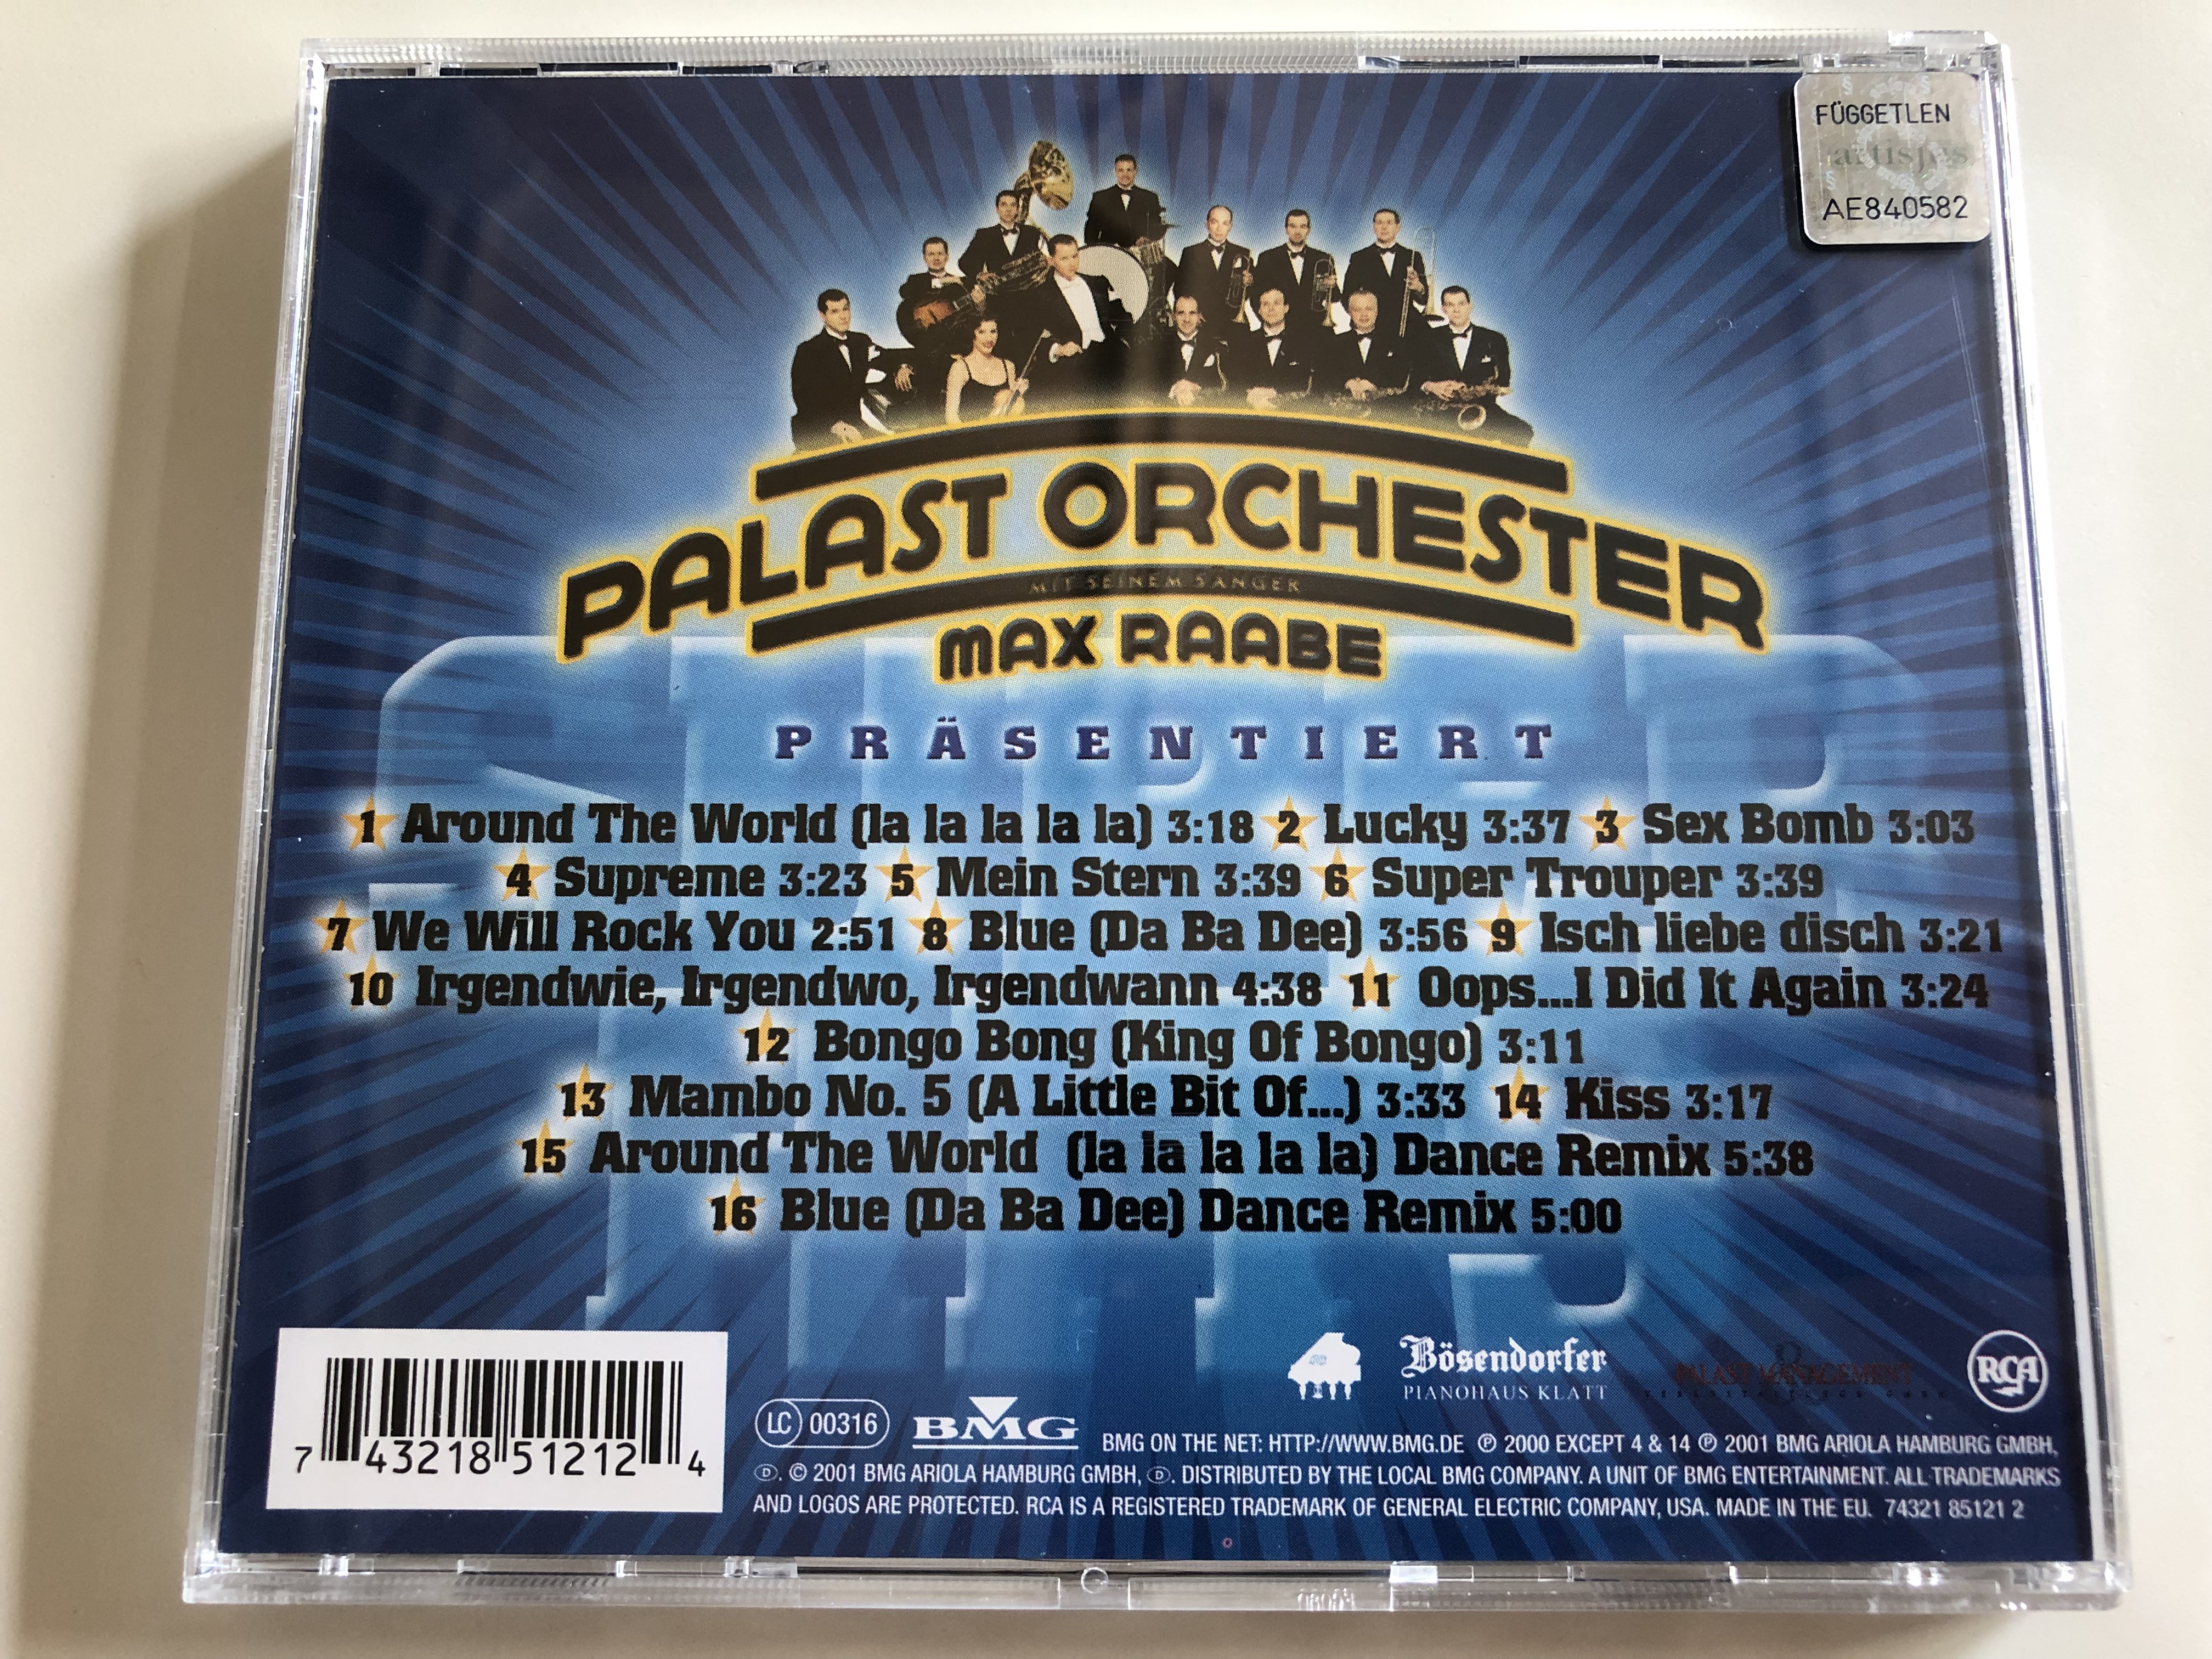 palast-orchester-super-hits-max-raabe-we-will-rock-you-mein-stern-lucky-mambo-nr.-5-supreme-audio-cd-2001-6-.jpg